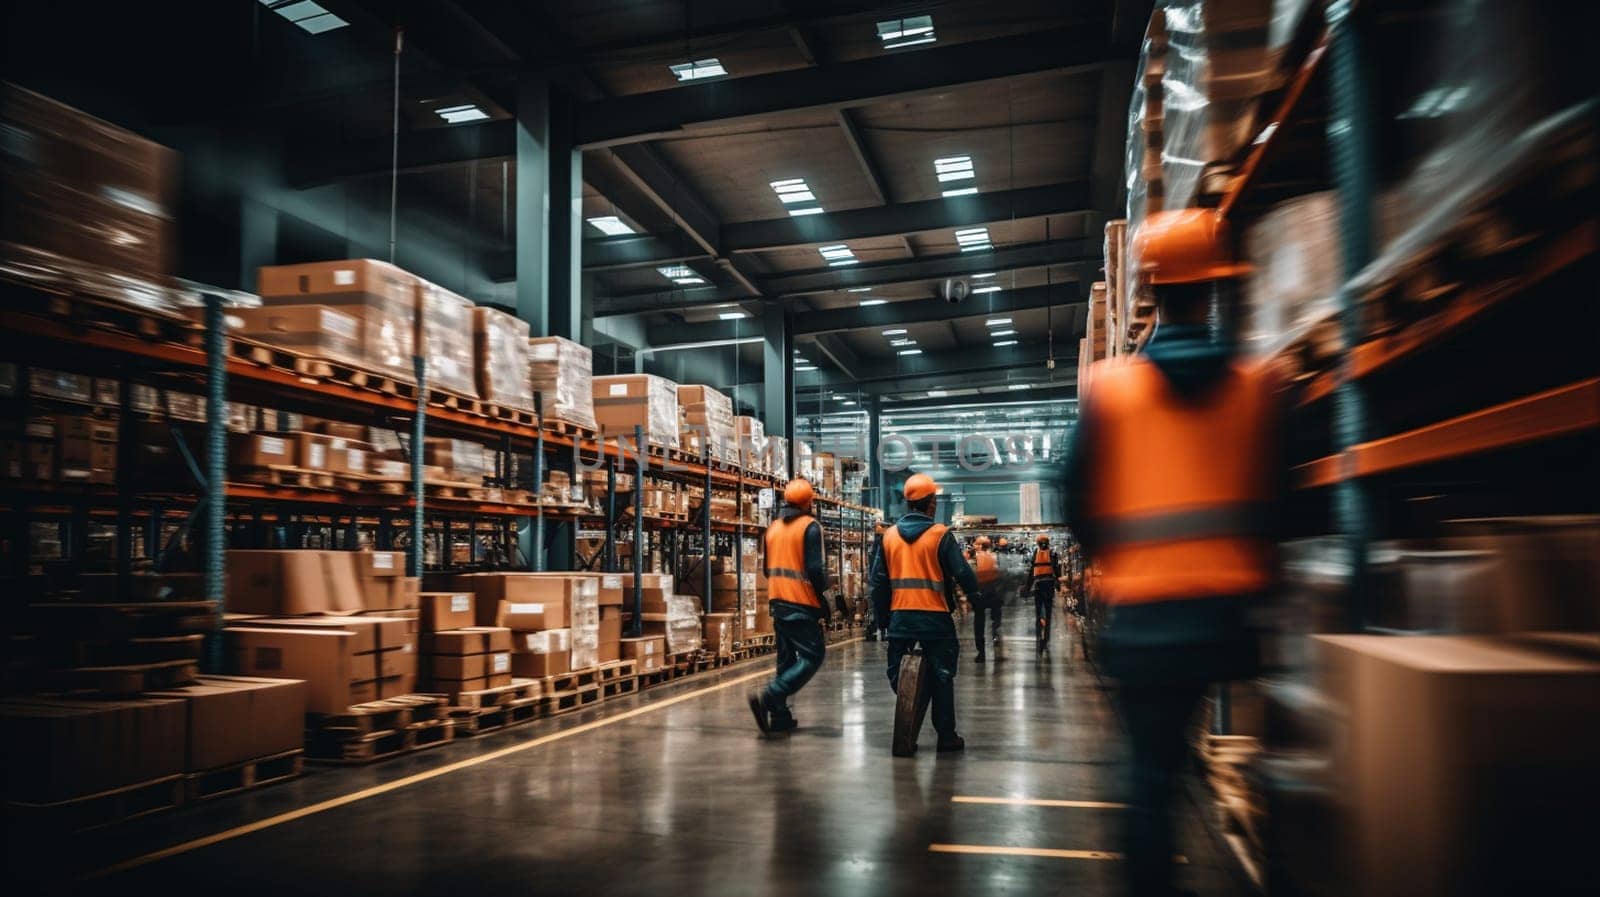 Logistics business warehouse, shipment and loading concept. workers in reflective vests blurred with movement. Staff in a warehouse move between storage racks, motion blur background transport by Andelov13